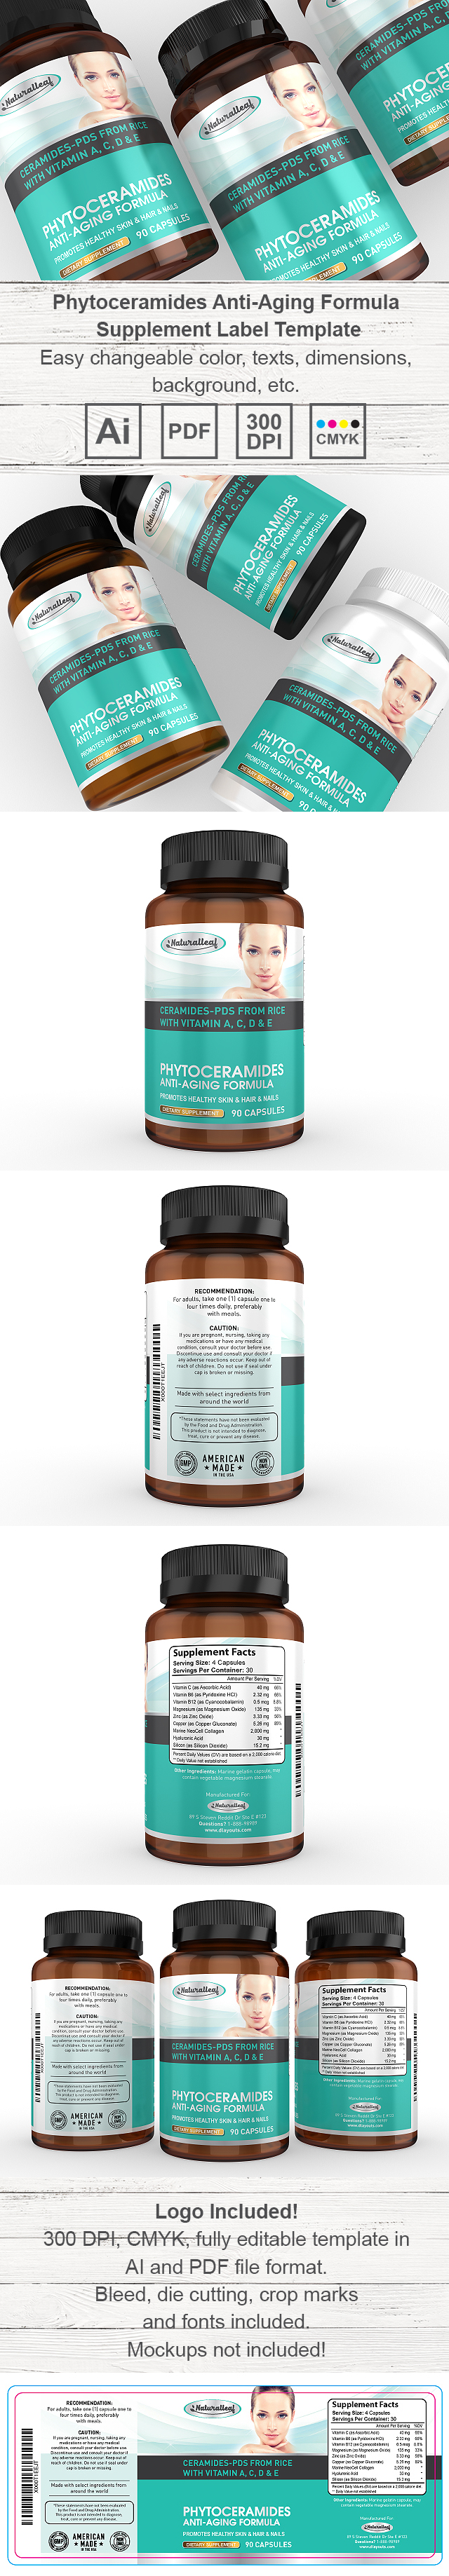 Phytoceramides Anti-aging Supplement Label Template